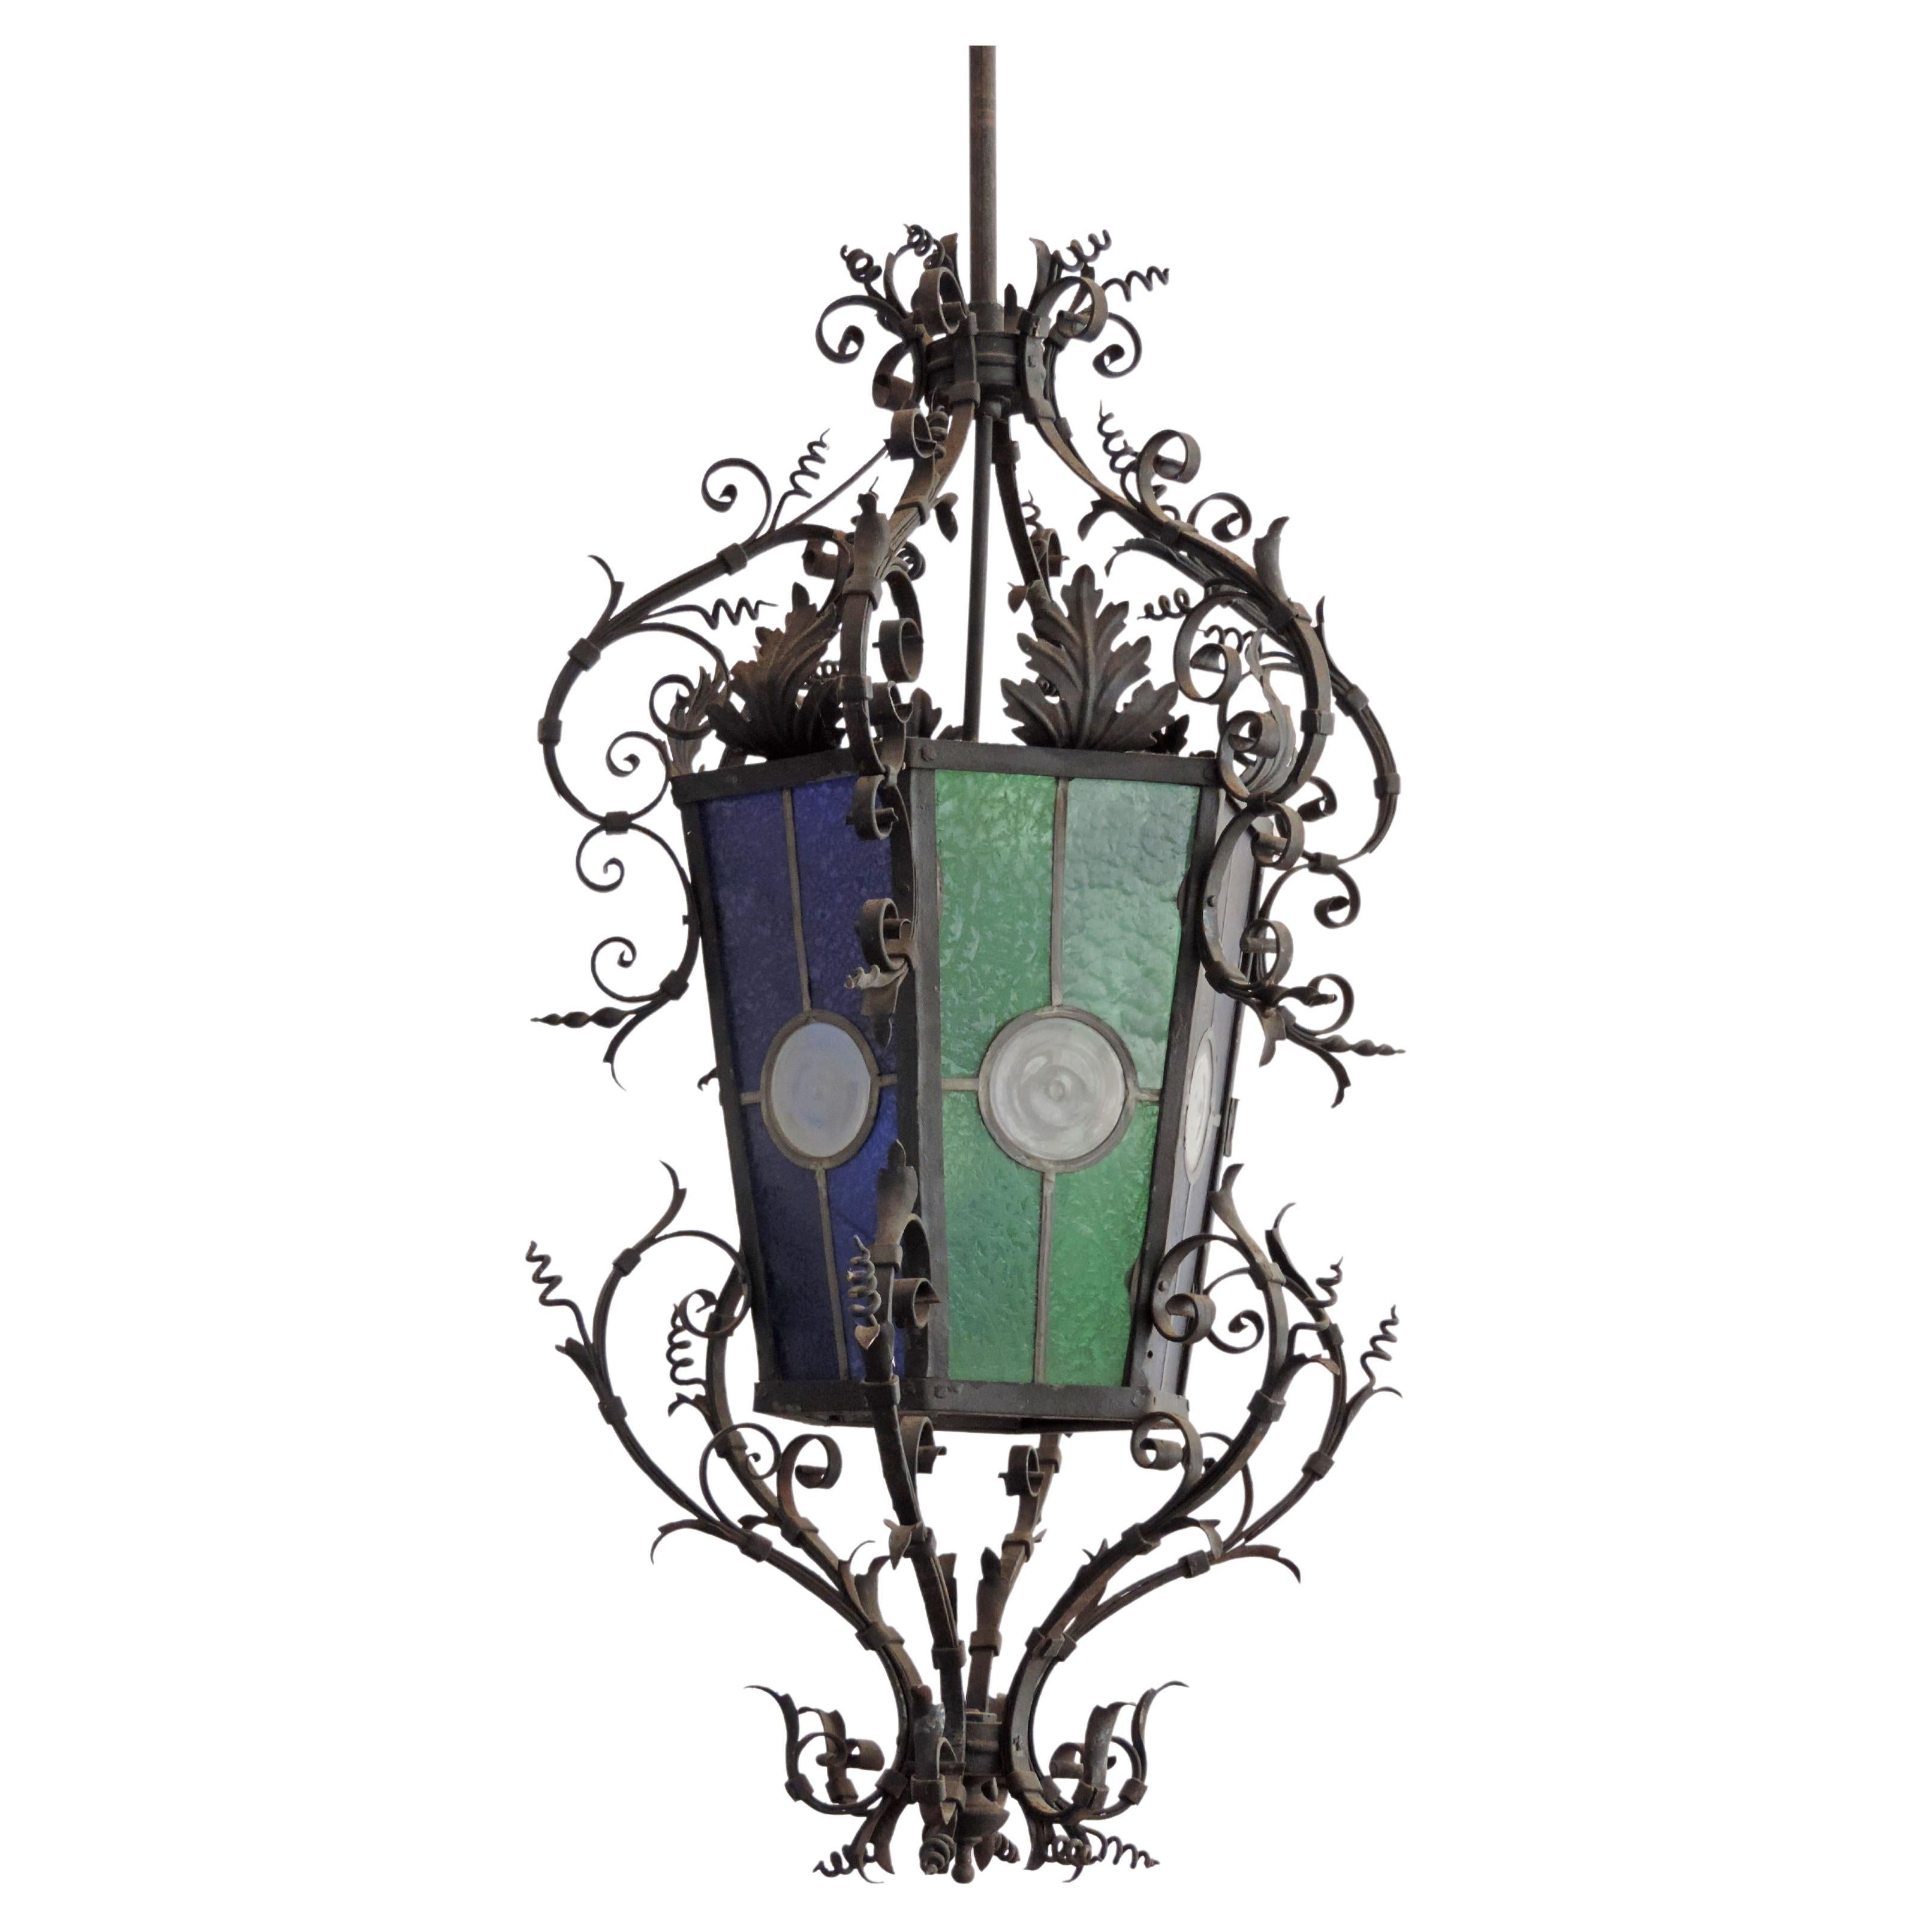 Monumental Italian Gothic style lantern in wrought iron and two colored blue and green stained glass.
The Lantern is measures 220 x 60 cm 
Lantern Body Without Pole Measures 91 x 60 cm
An Exceptional addition for Indoors or Outdoors.
Carries two